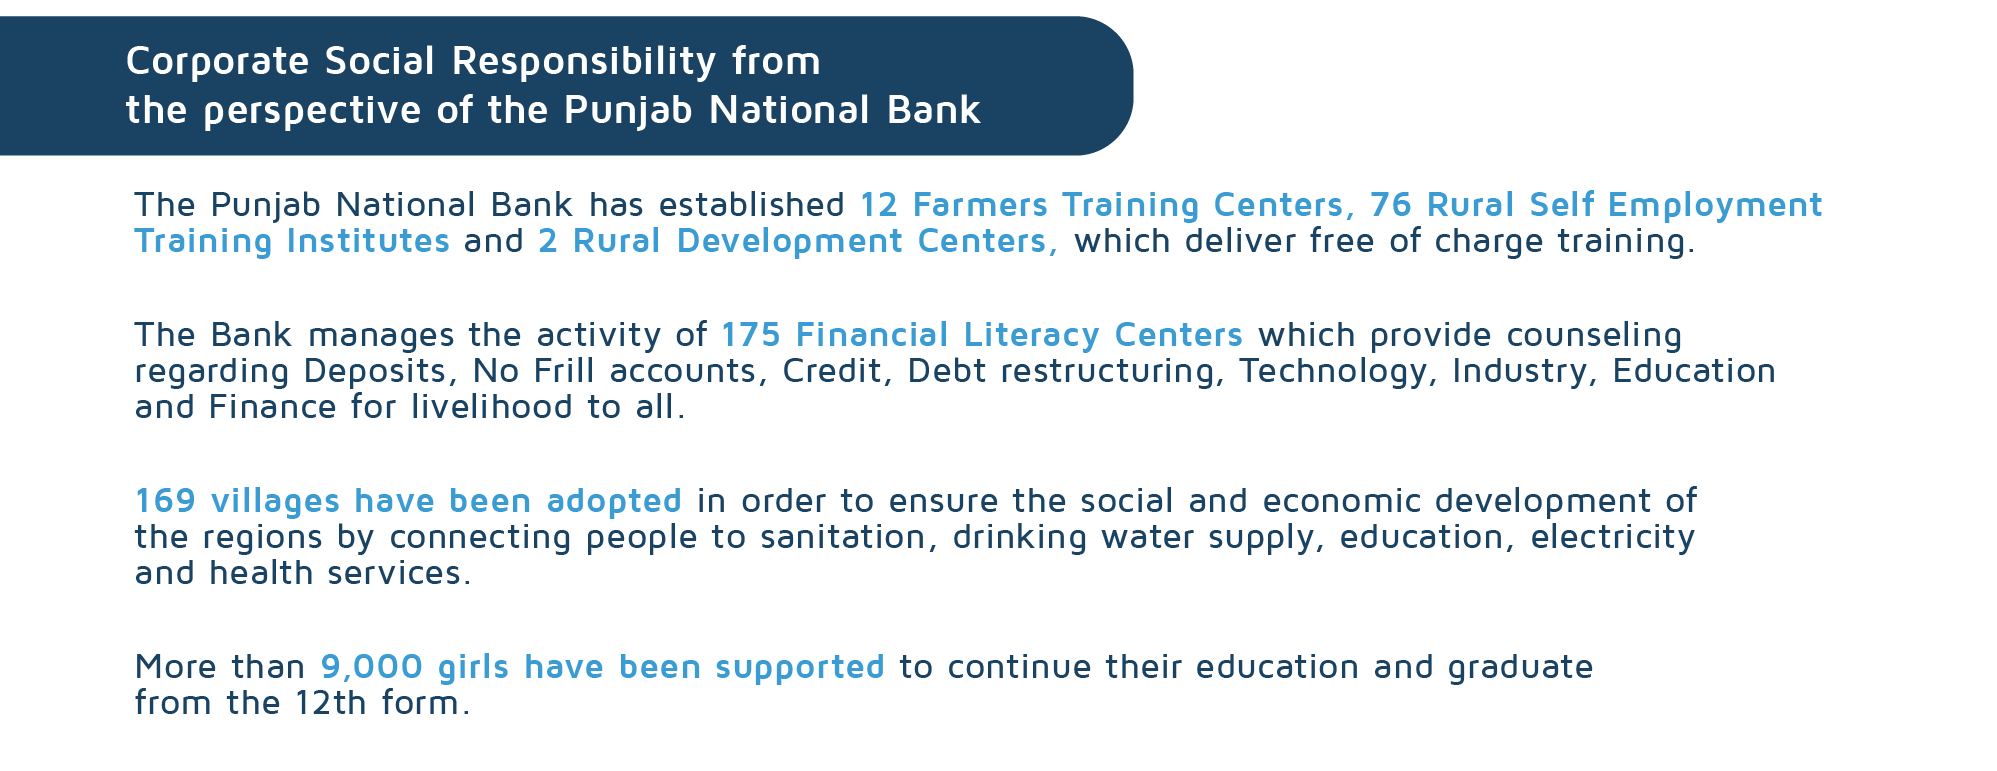 Corporate Social Responsibility from the perspective of the Punjab National Bank